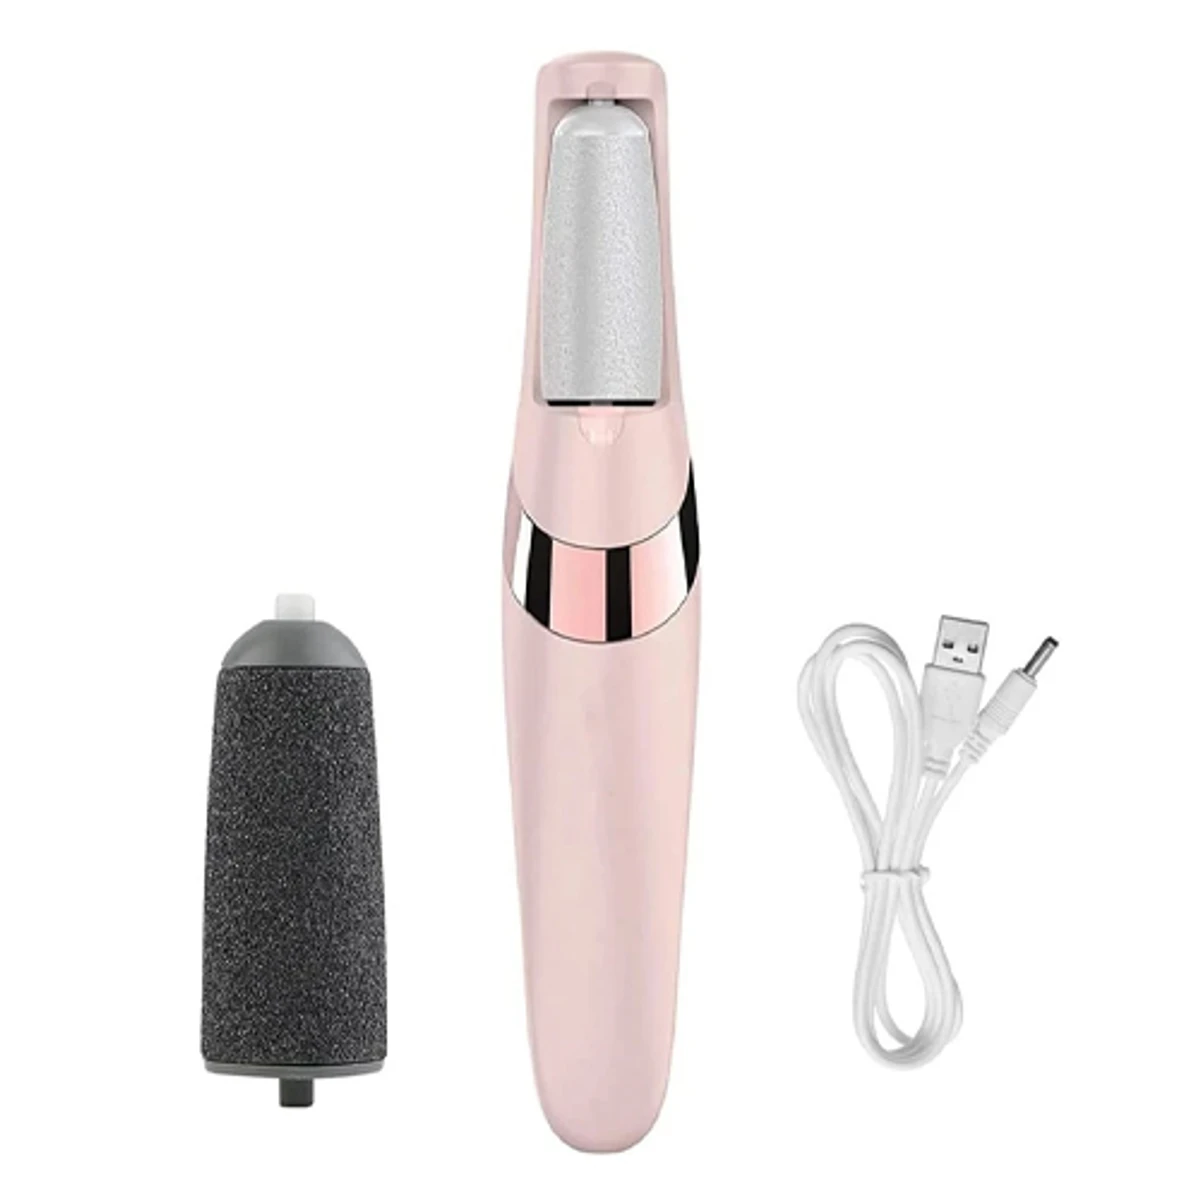 Stainless Steel Pedicure Kit for Foot Care